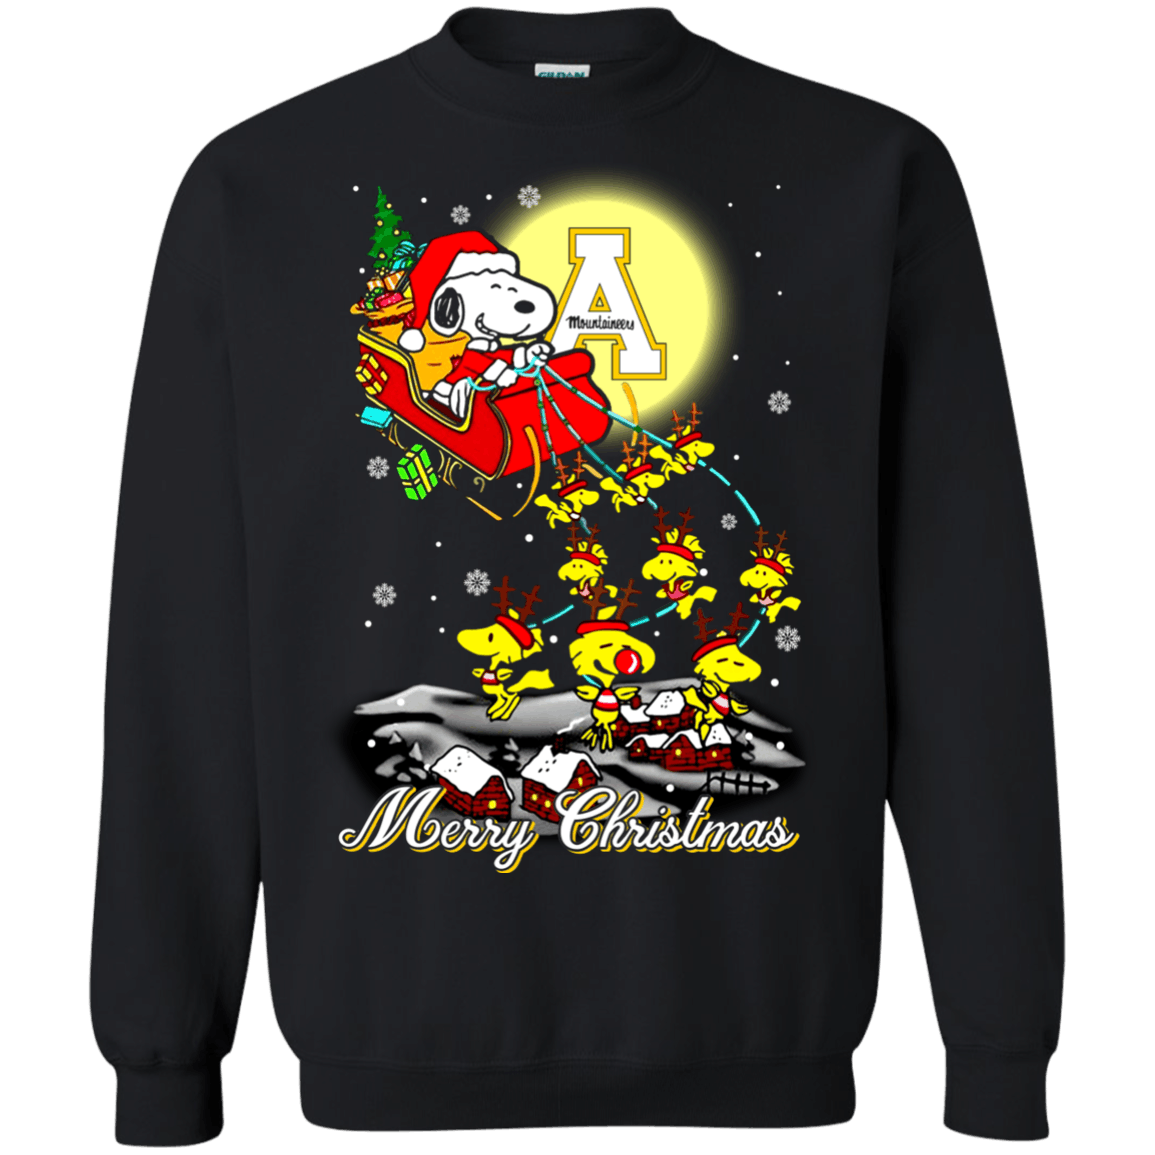 Outstanding Appalachian State Mountaineers Ugly Christmas Sweaters Santa Claus With Sleigh And Snoopy Sweatshirts